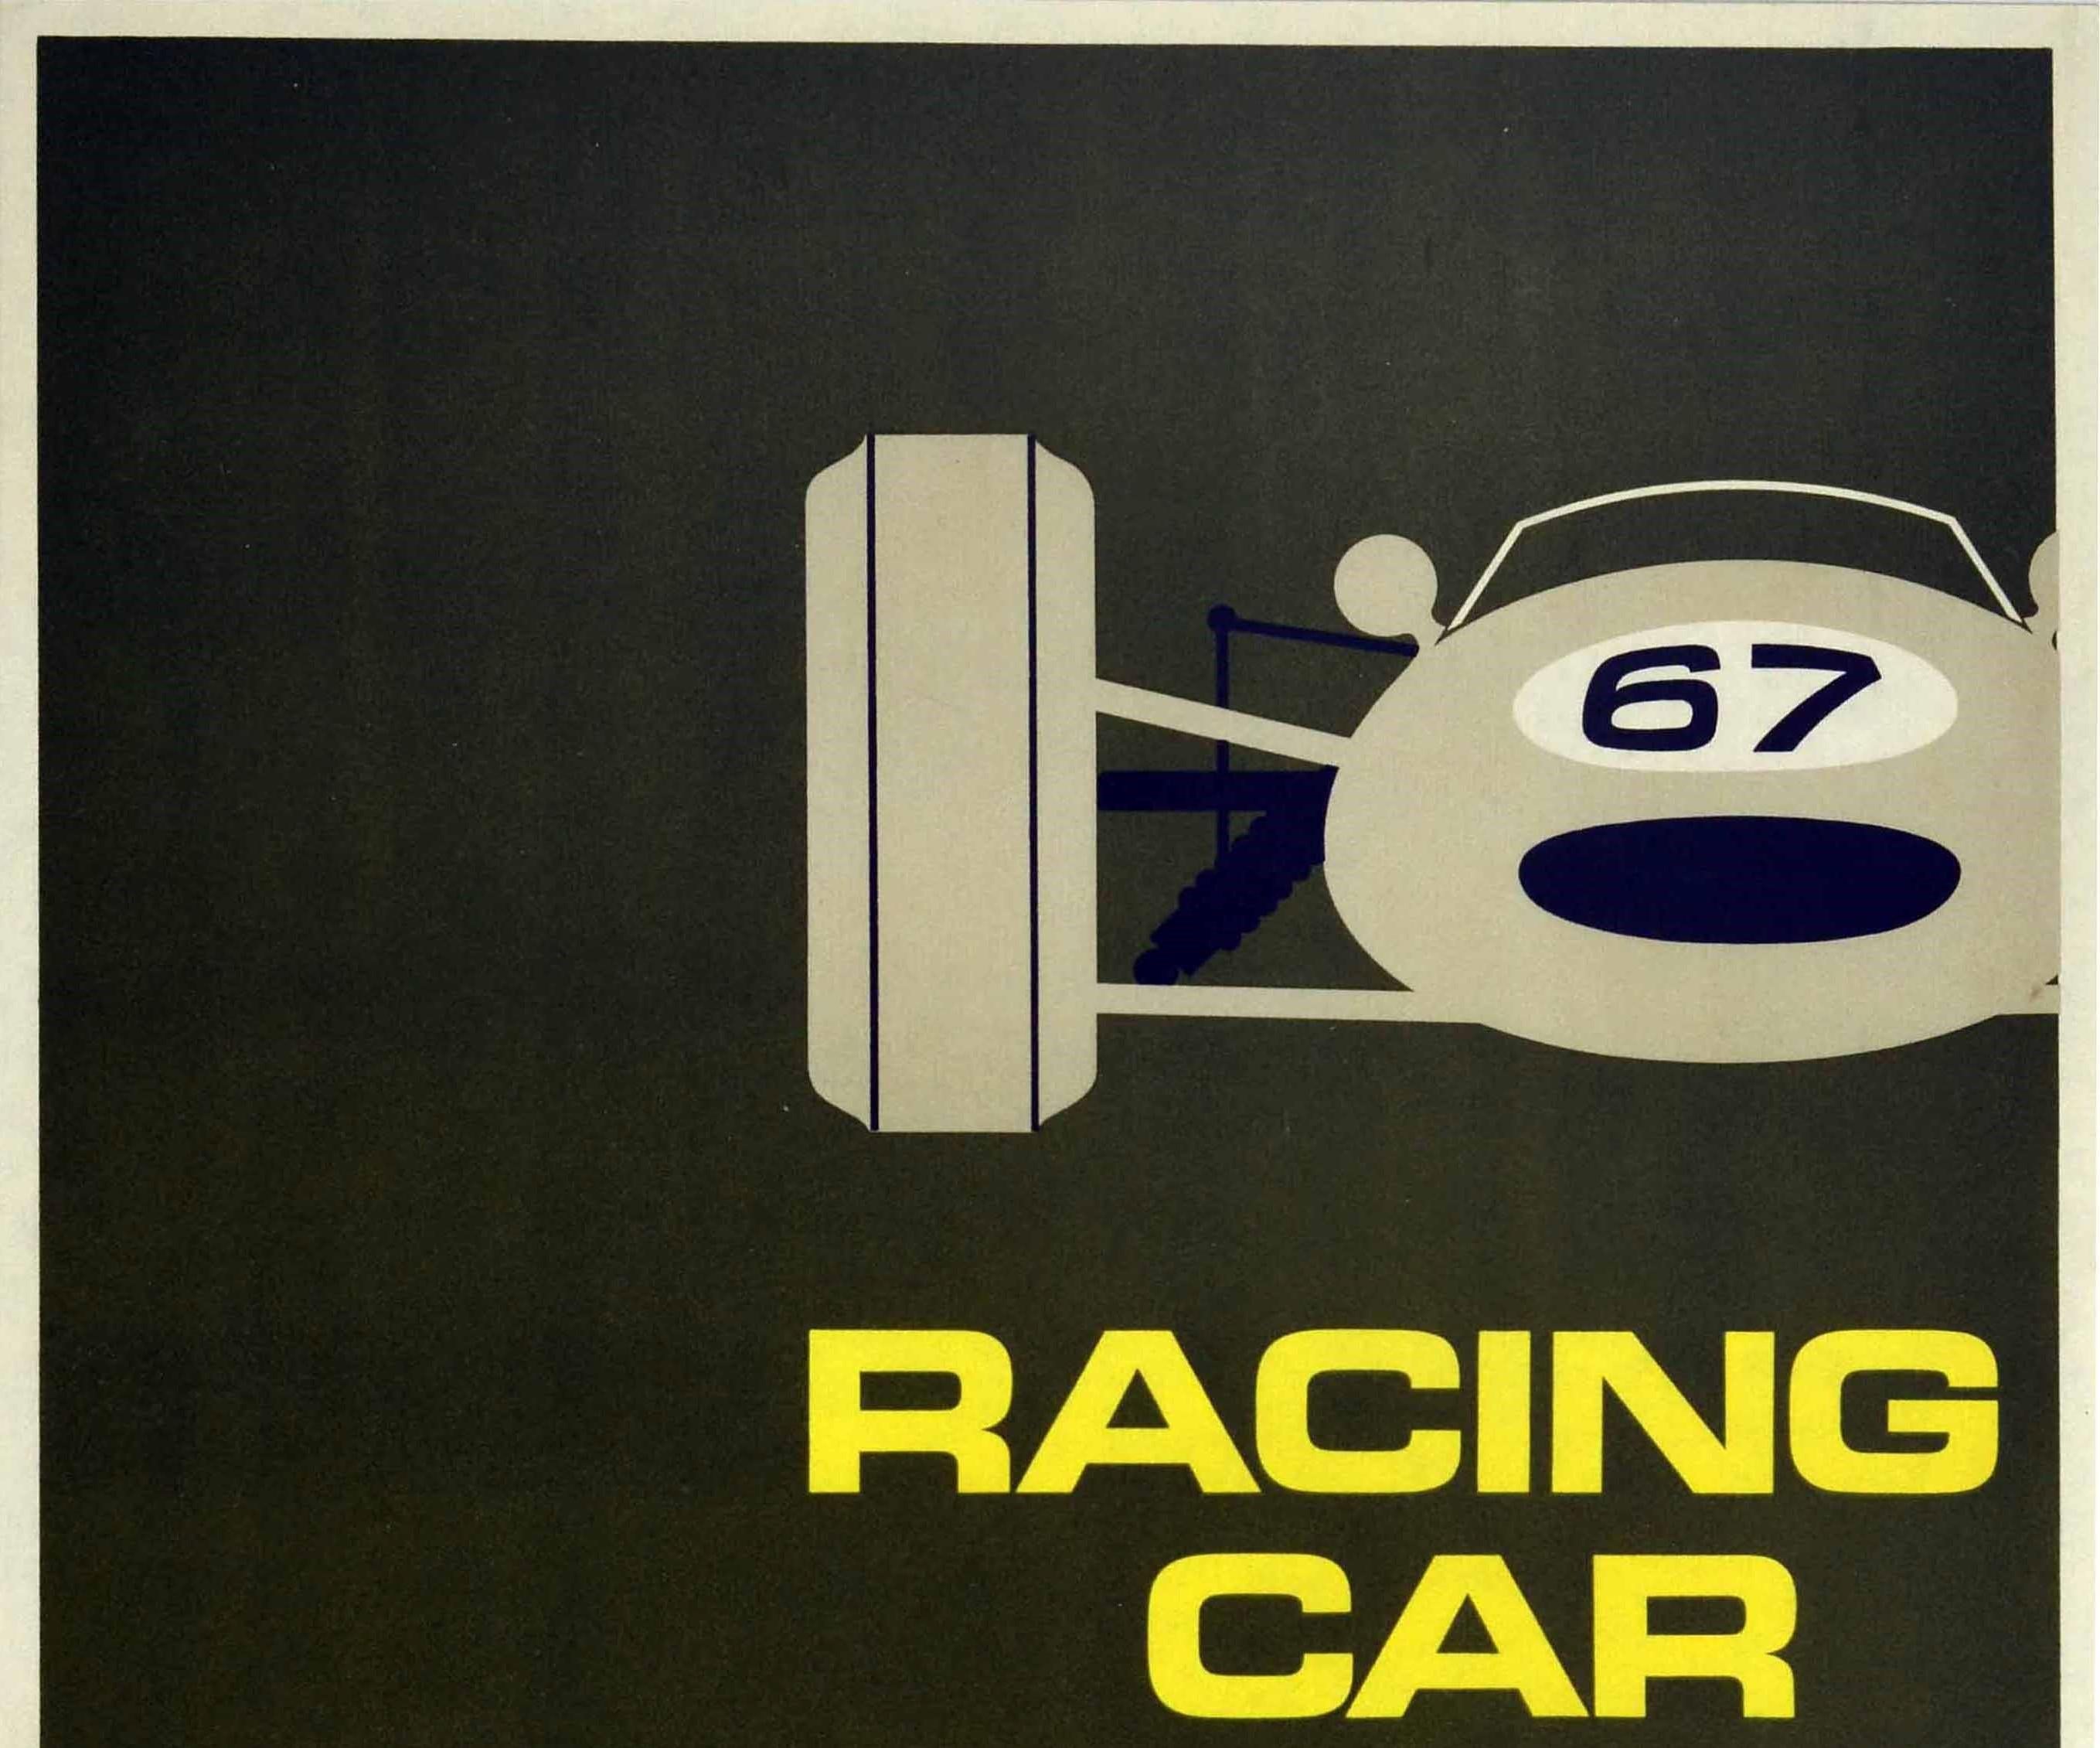 Original vintage event poster for the Racing Car Show Olympia National Hall 4-14 January 1967 featuring a mid-century modern design of a sports car numbered 67 on a dark background with the bold lettering and logos below. Presented by the British